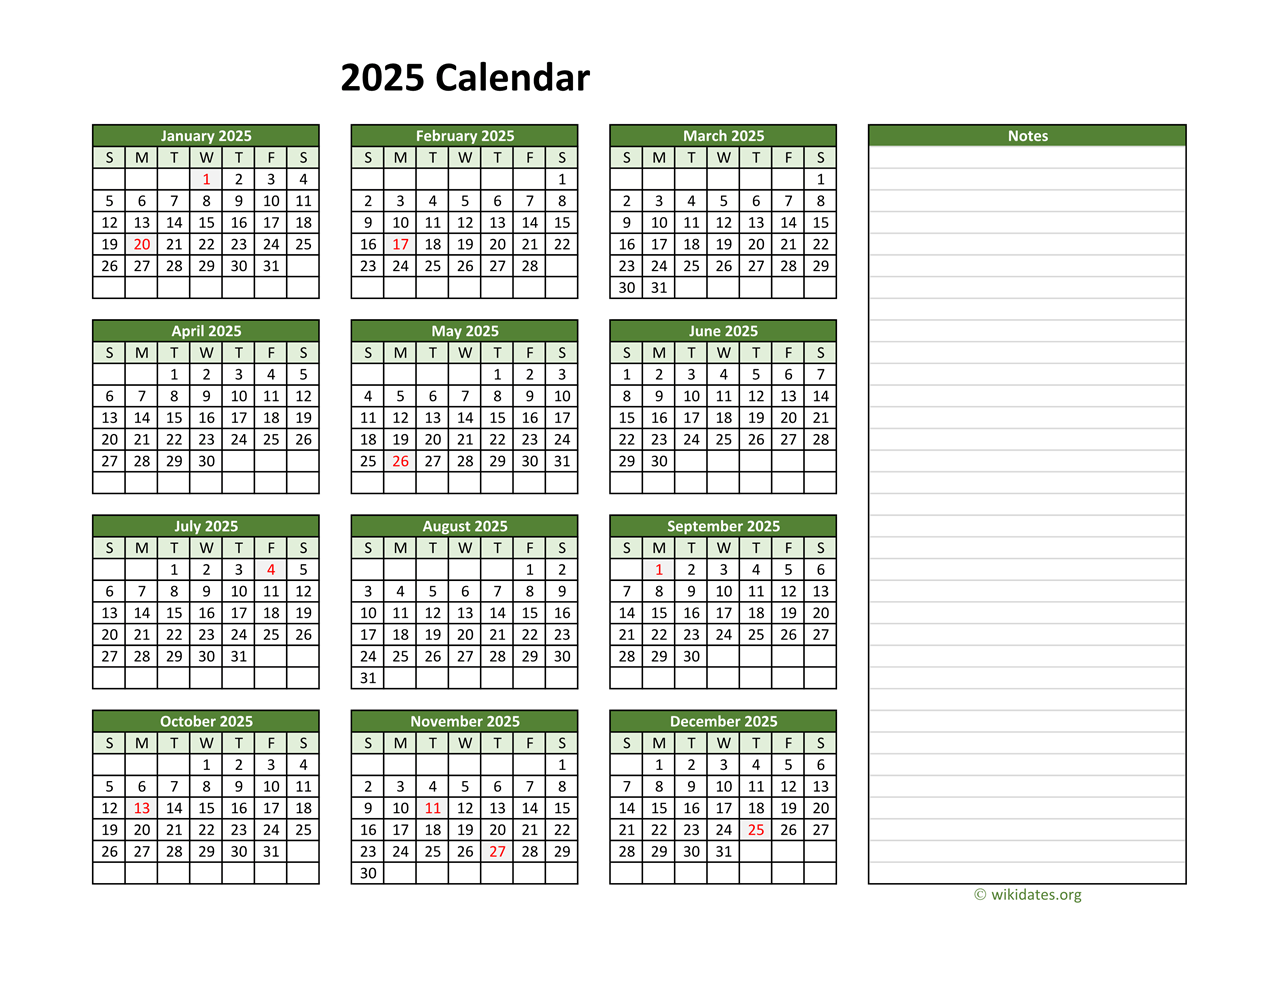 yearly-printable-2025-calendar-with-notes-wikidates